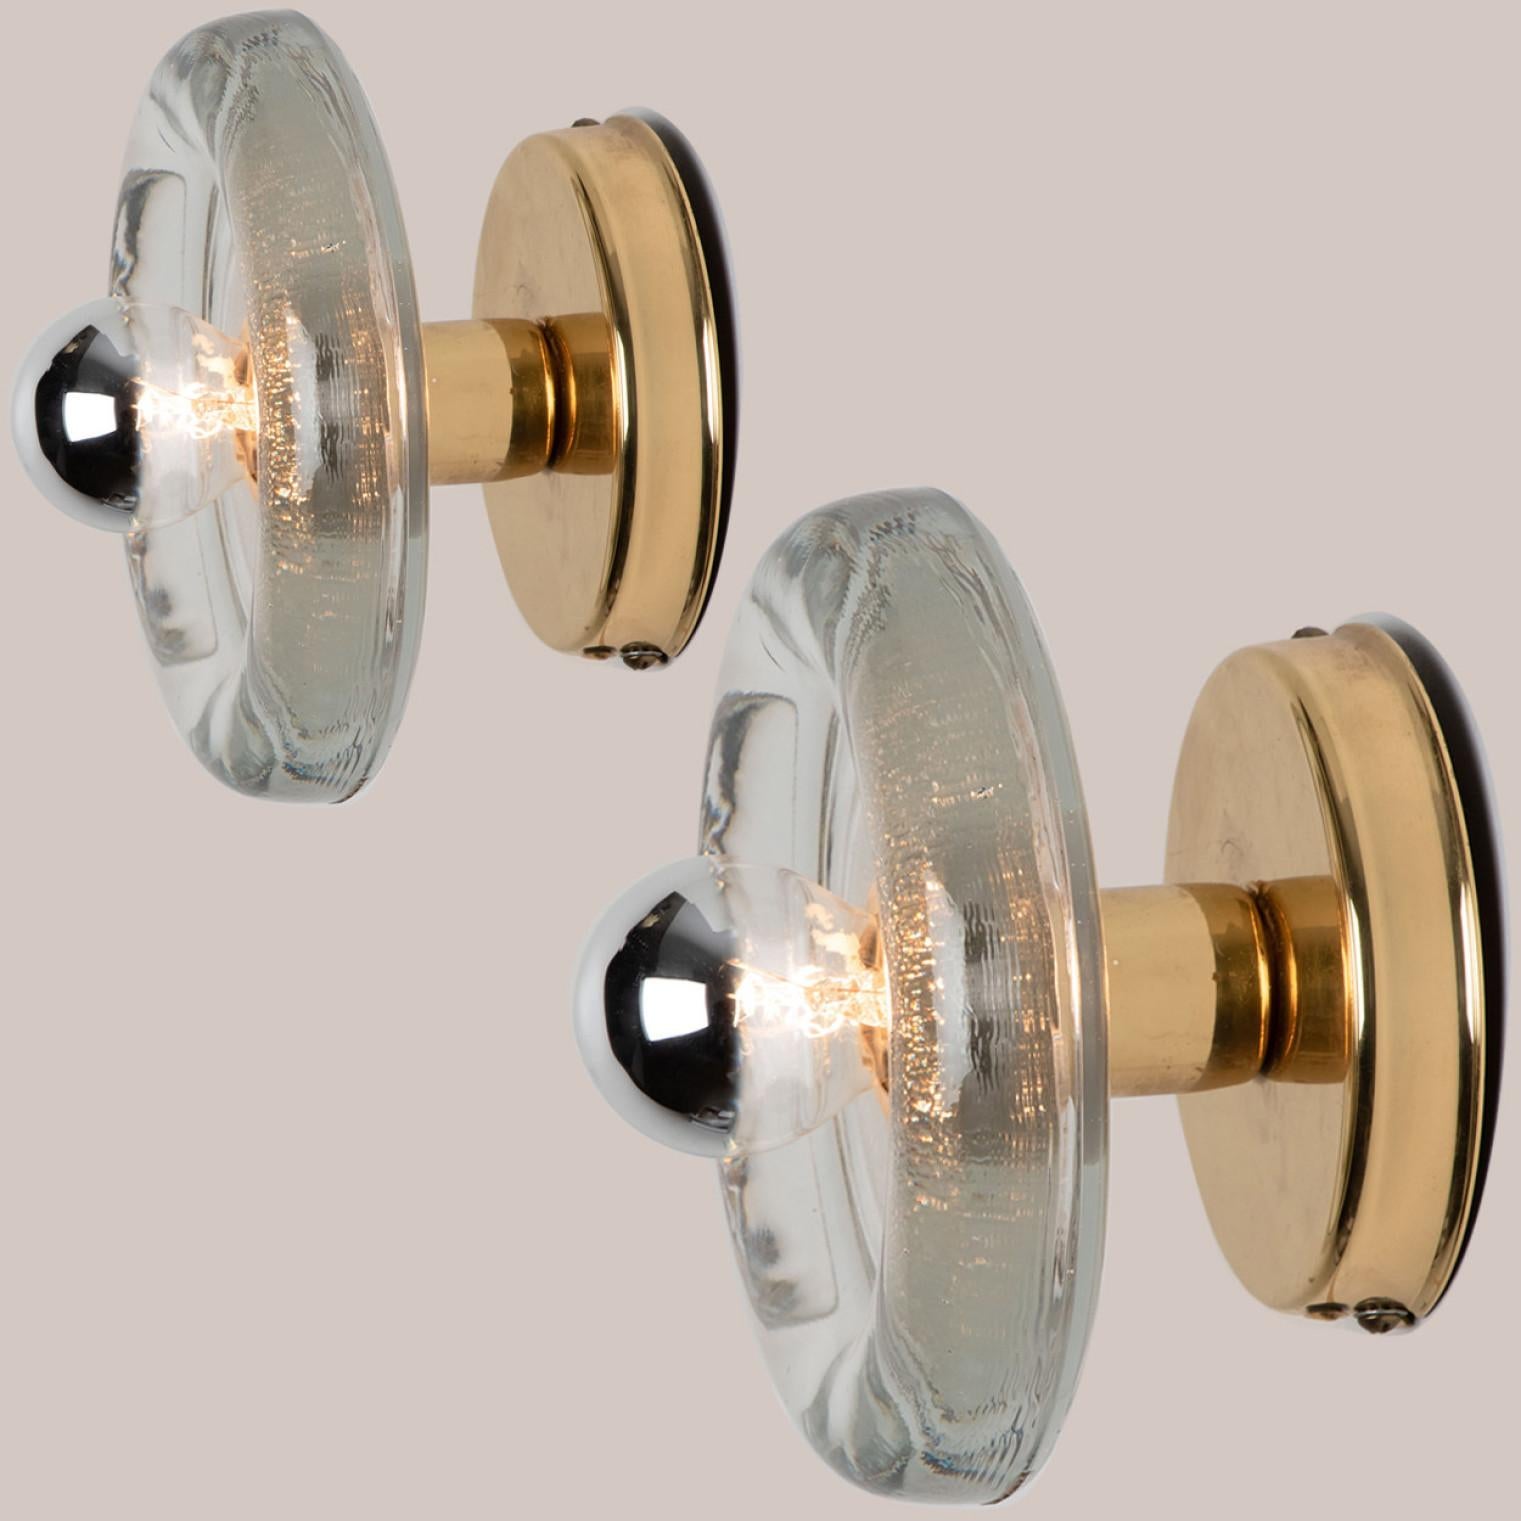 
A pair of Putzler wall light in sculptural glass on a round brass frame, circa 1970s, Germany. A clear design, with modern materials.

This modernist design is focused on the textured round thick glass glass, when illuminated and with use of mirror